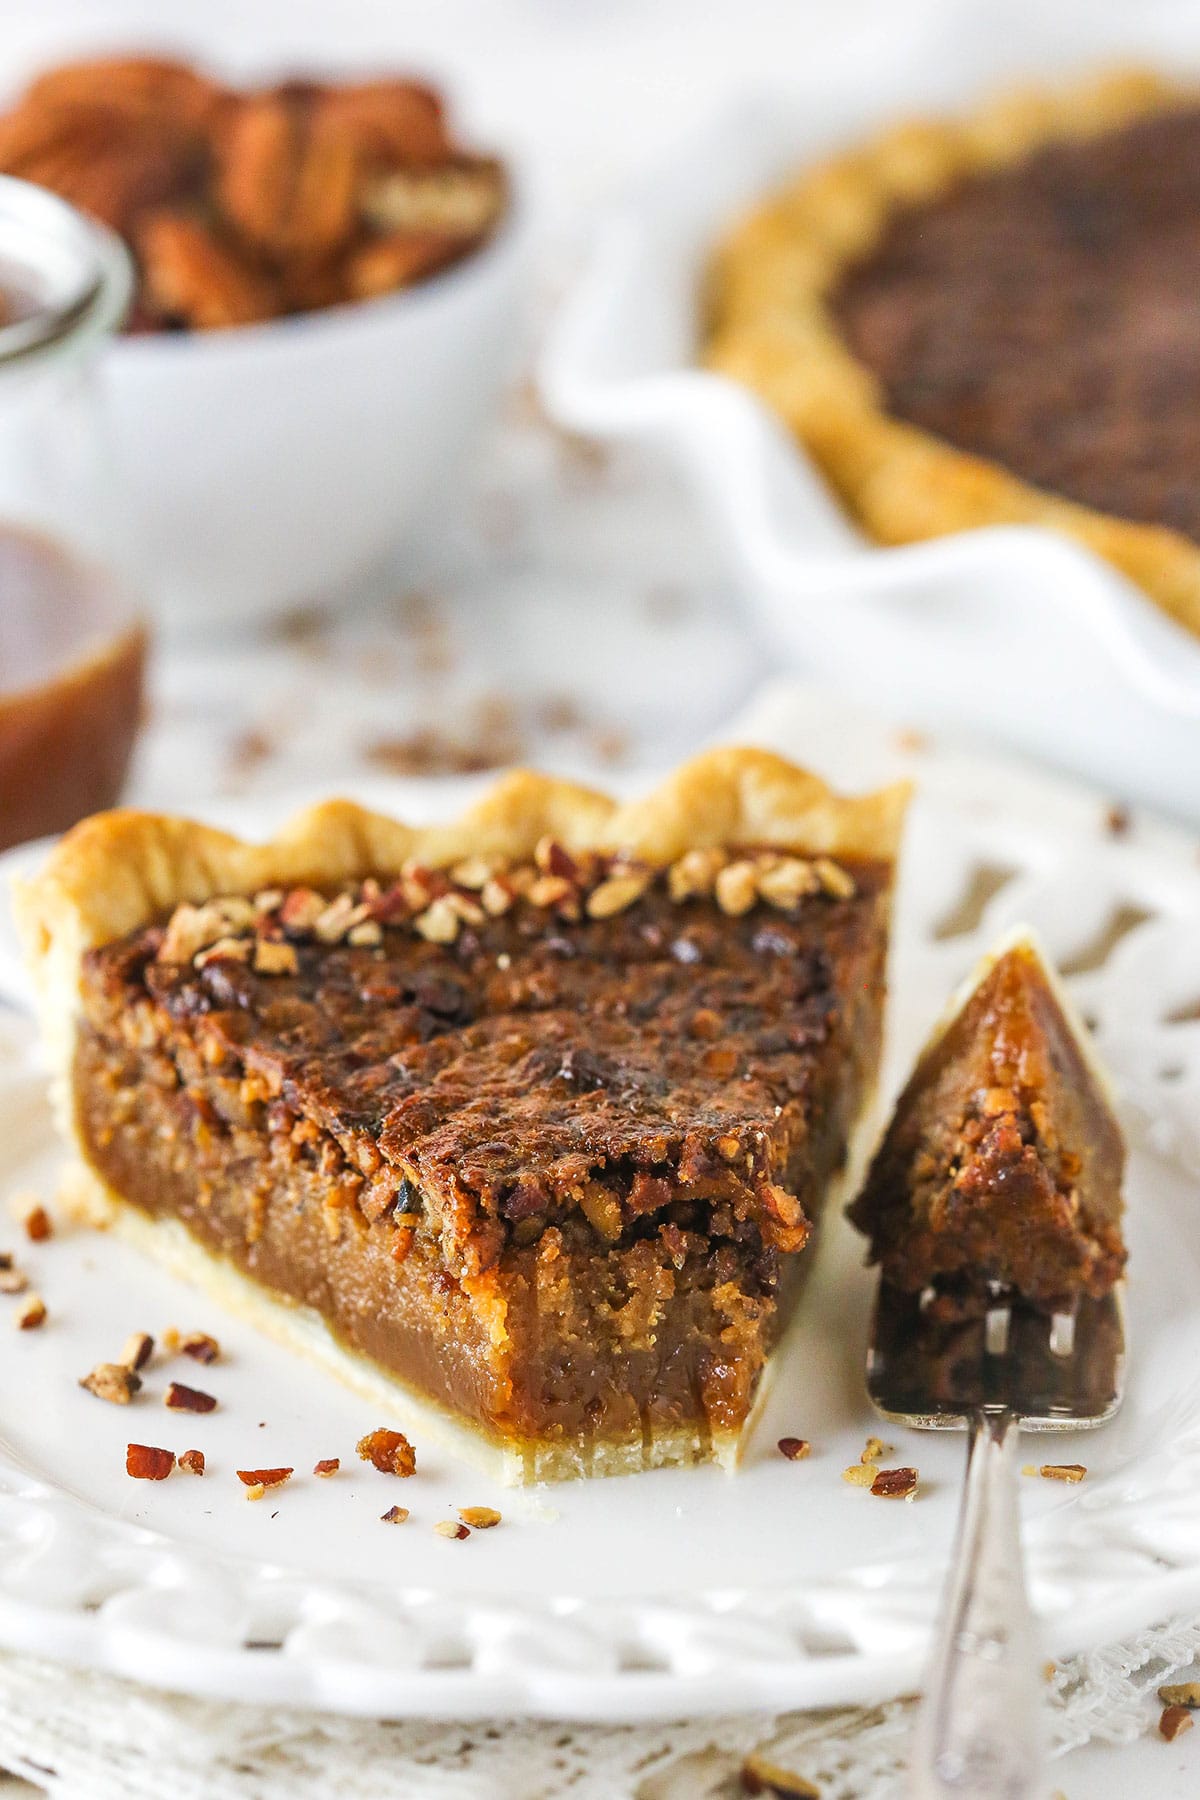 A slice of caramel pecan pie on a plate with one bite on a metal fork